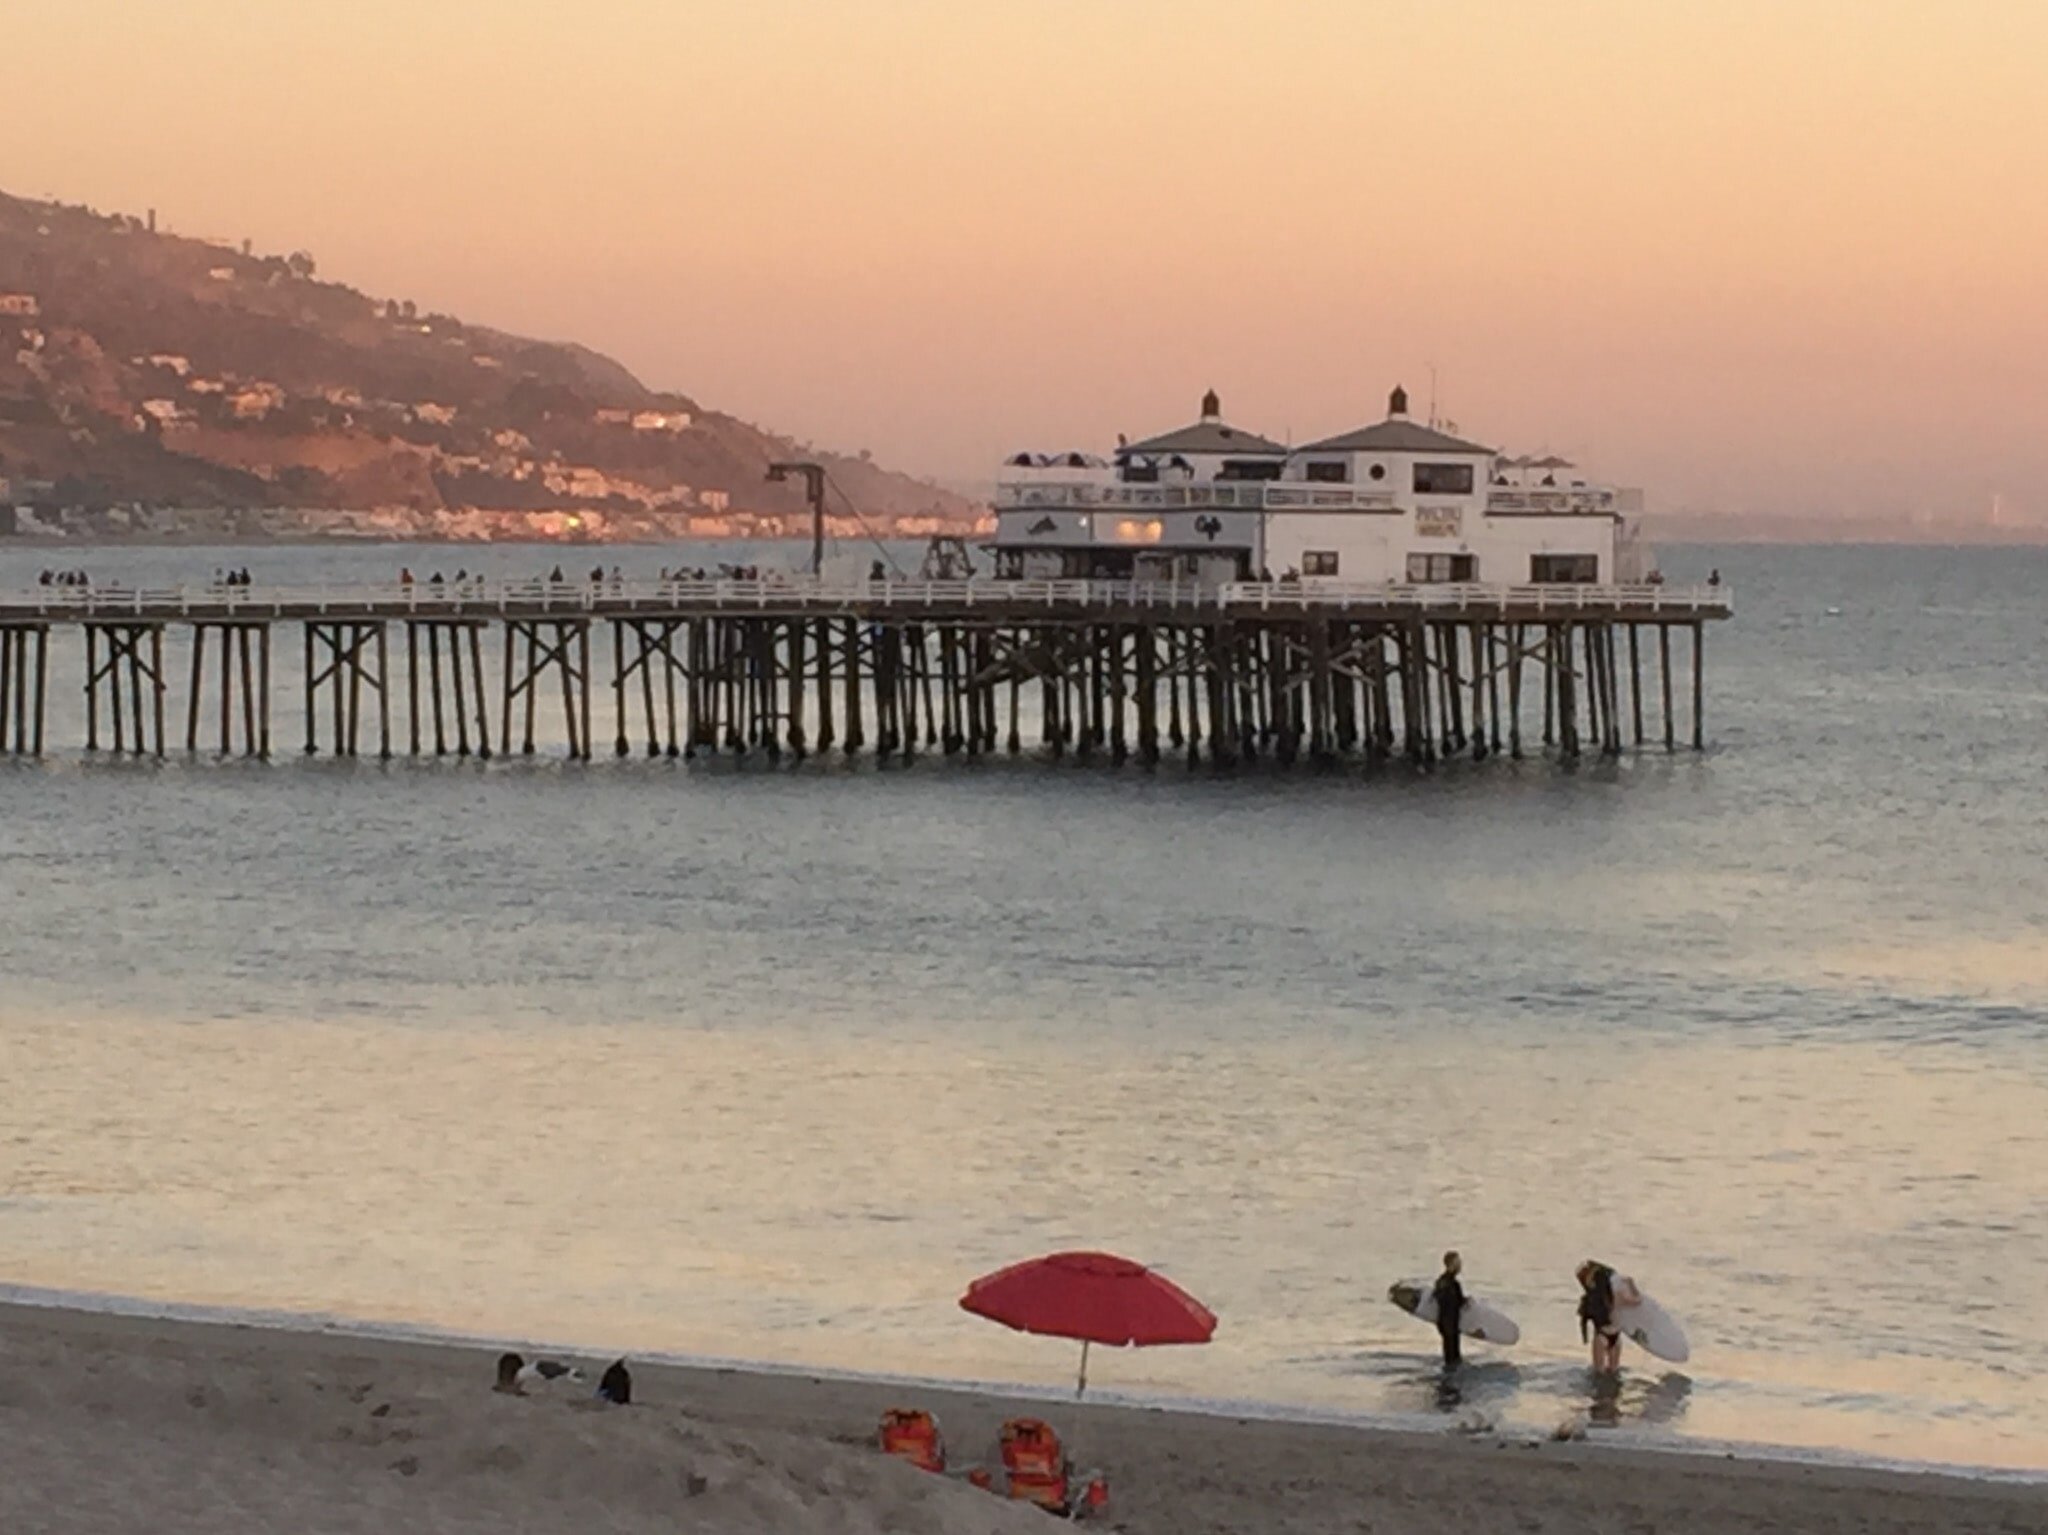 Hidden' Malibu beach will open to the public for the first time in 40 years, California